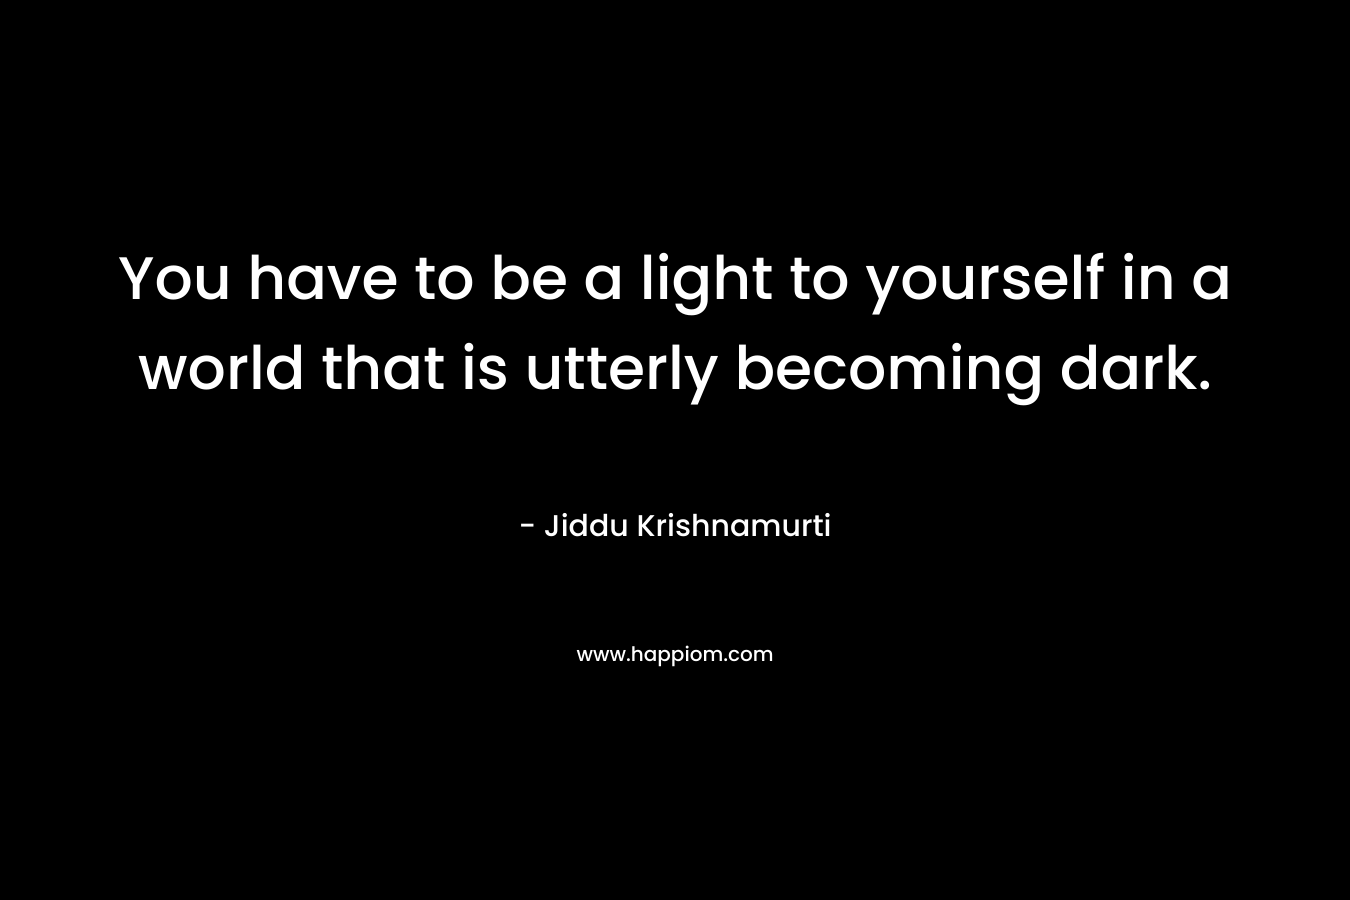 You have to be a light to yourself in a world that is utterly becoming dark.